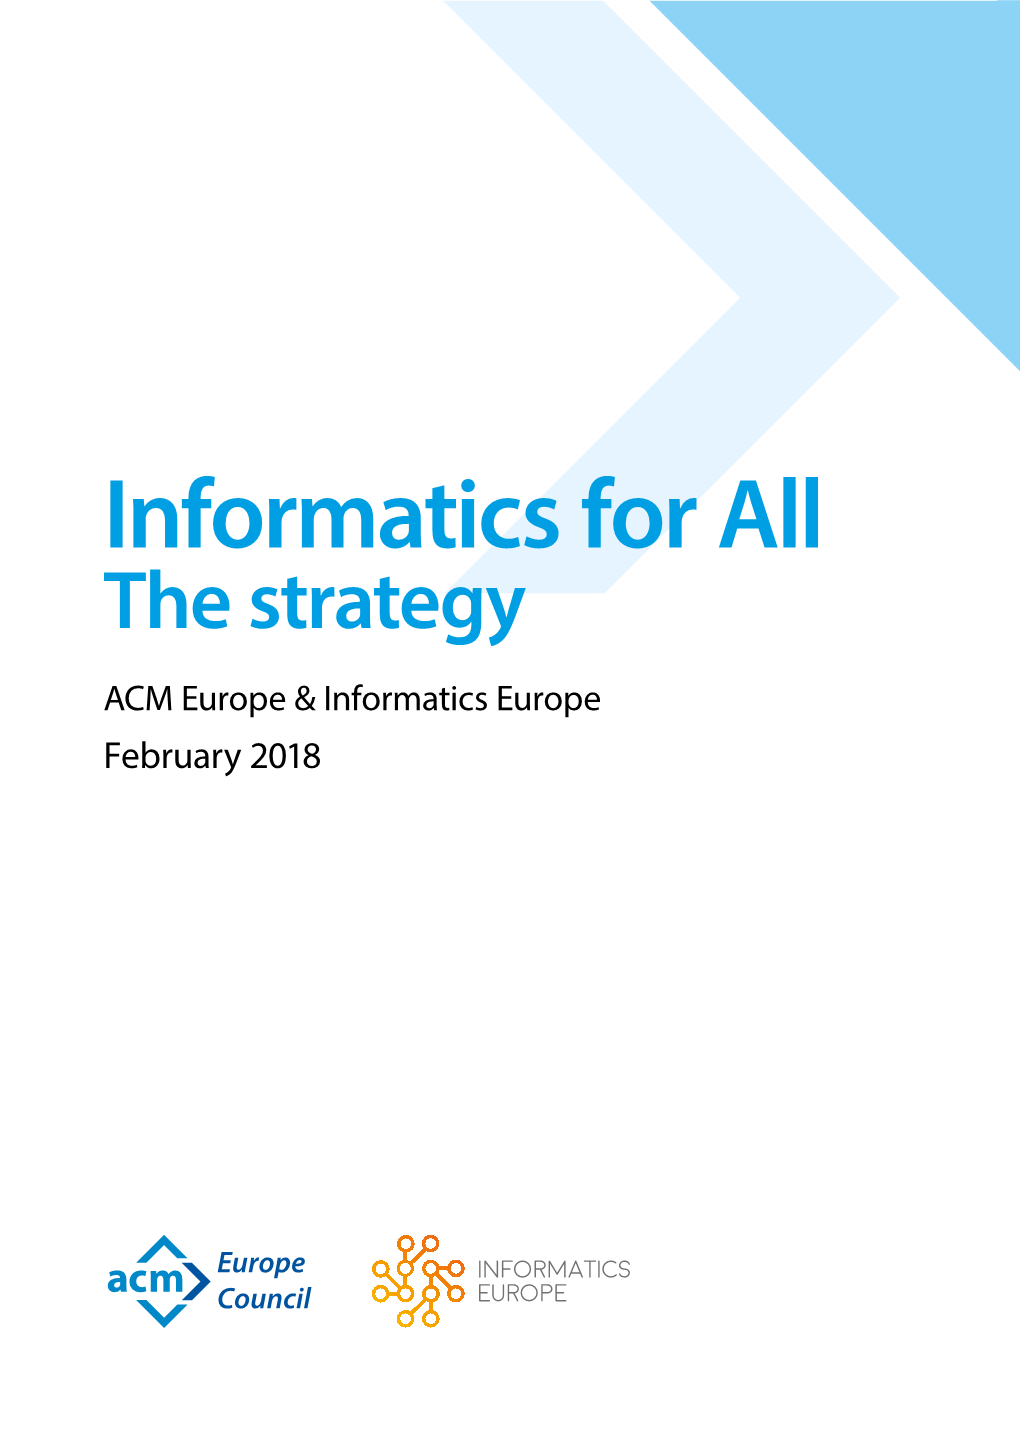 Informatics for All: the Strategy